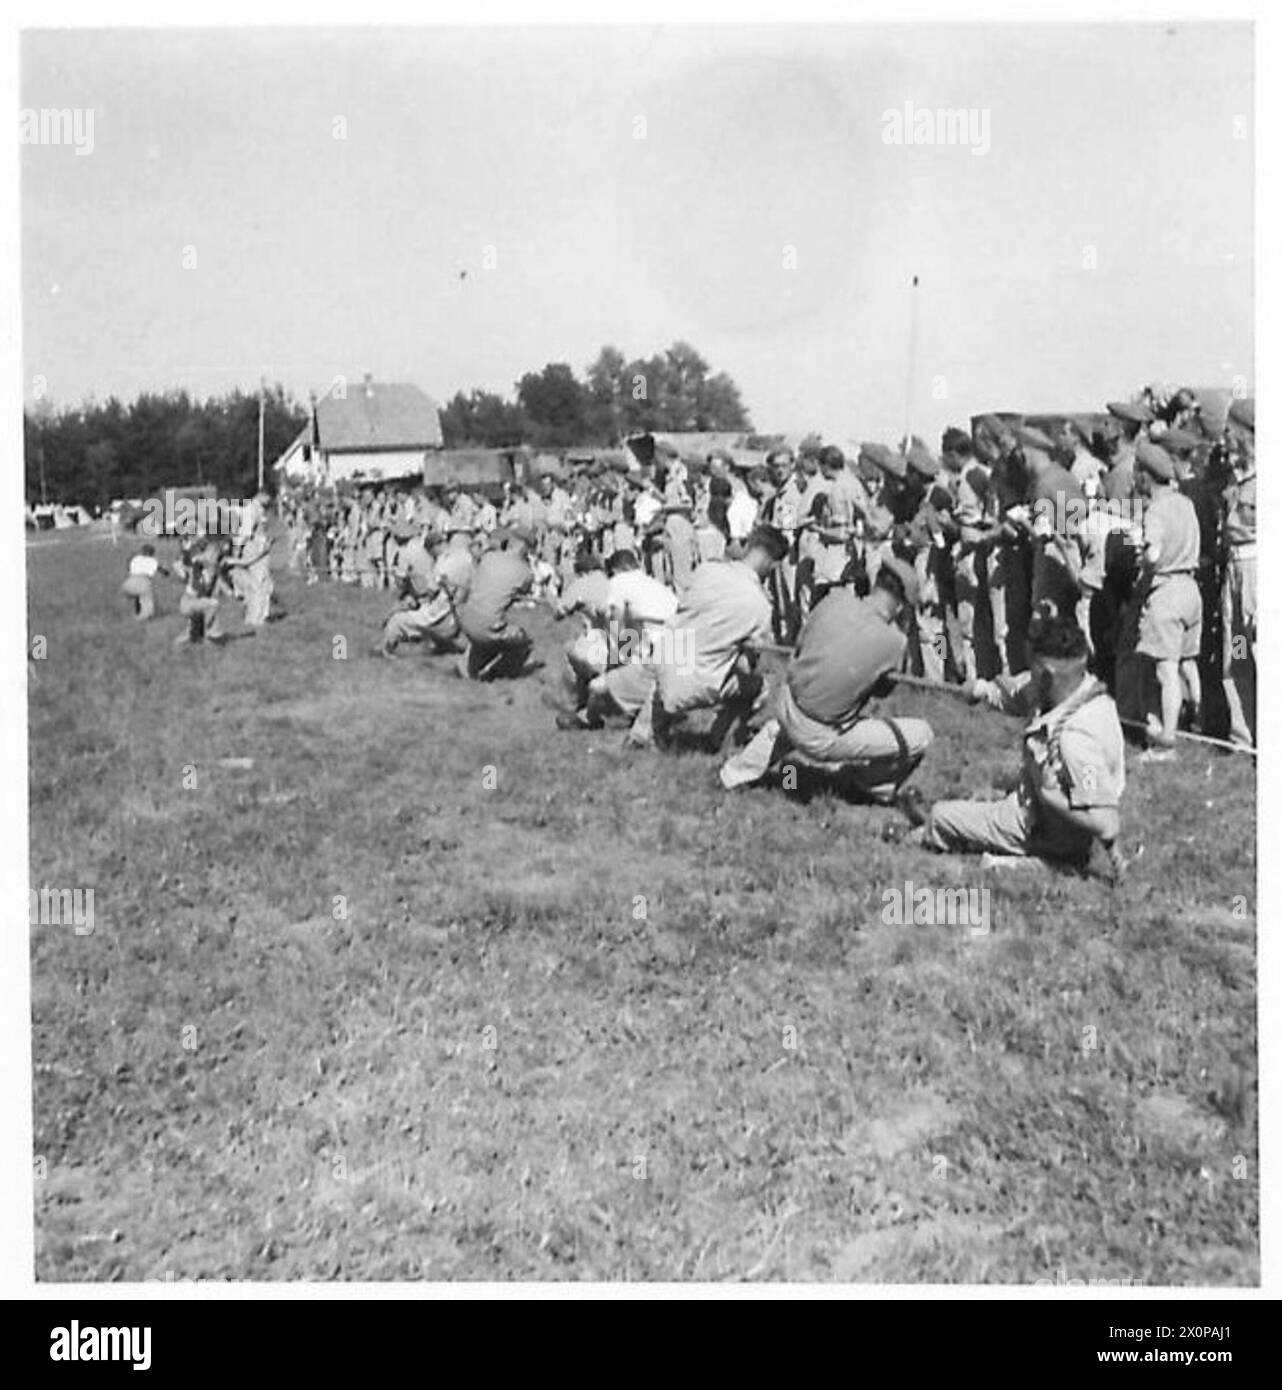 R.E.M.E. SPORTSPICTURES TO ILLUSTRATE OBSERVER STORY NO. 265 by CAPTAIN TRISTRAM - Two hefty teams having a good tussle during the tug-o-war event. Photographic negative , British Army Stock Photo